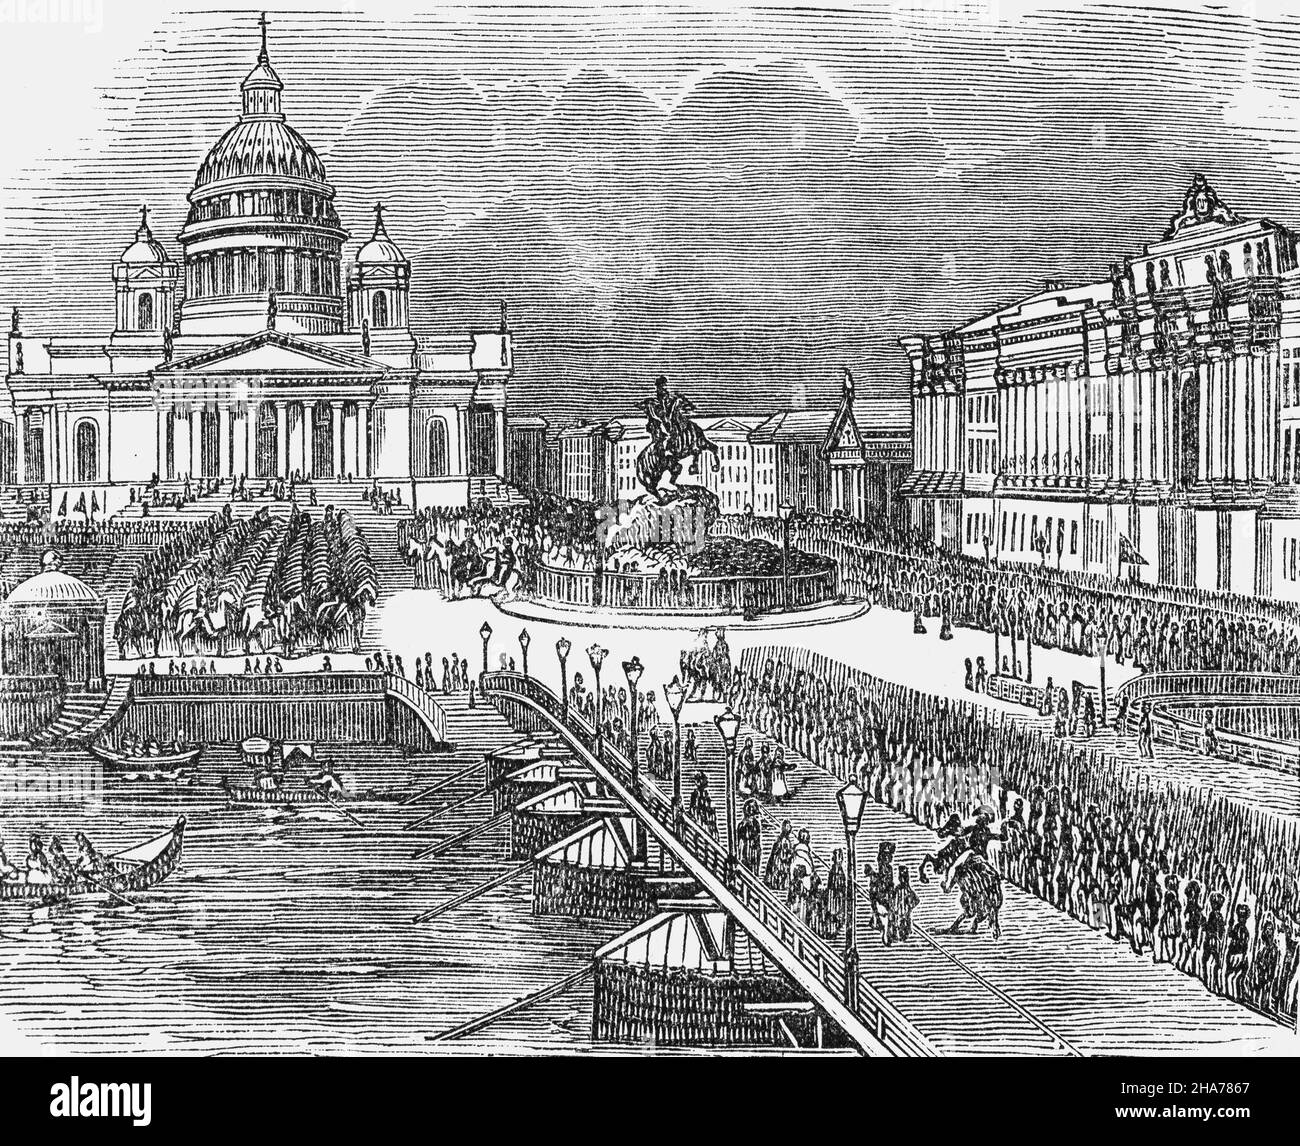 A late 19th Century illustration of a military parade in St Isaac's Place, in St Petersburgh, Russia. St. Isaac's Cathedral, built at the side of the Neva River between 1818 and 1858, by the French-born architect Auguste Montferrand,  was originally the city's main church and the largest cathedral in Russia. One hundred and eighty years later the gilded dome of St. Isaac's still dominates the skyline of St. Petersburg. Stock Photo